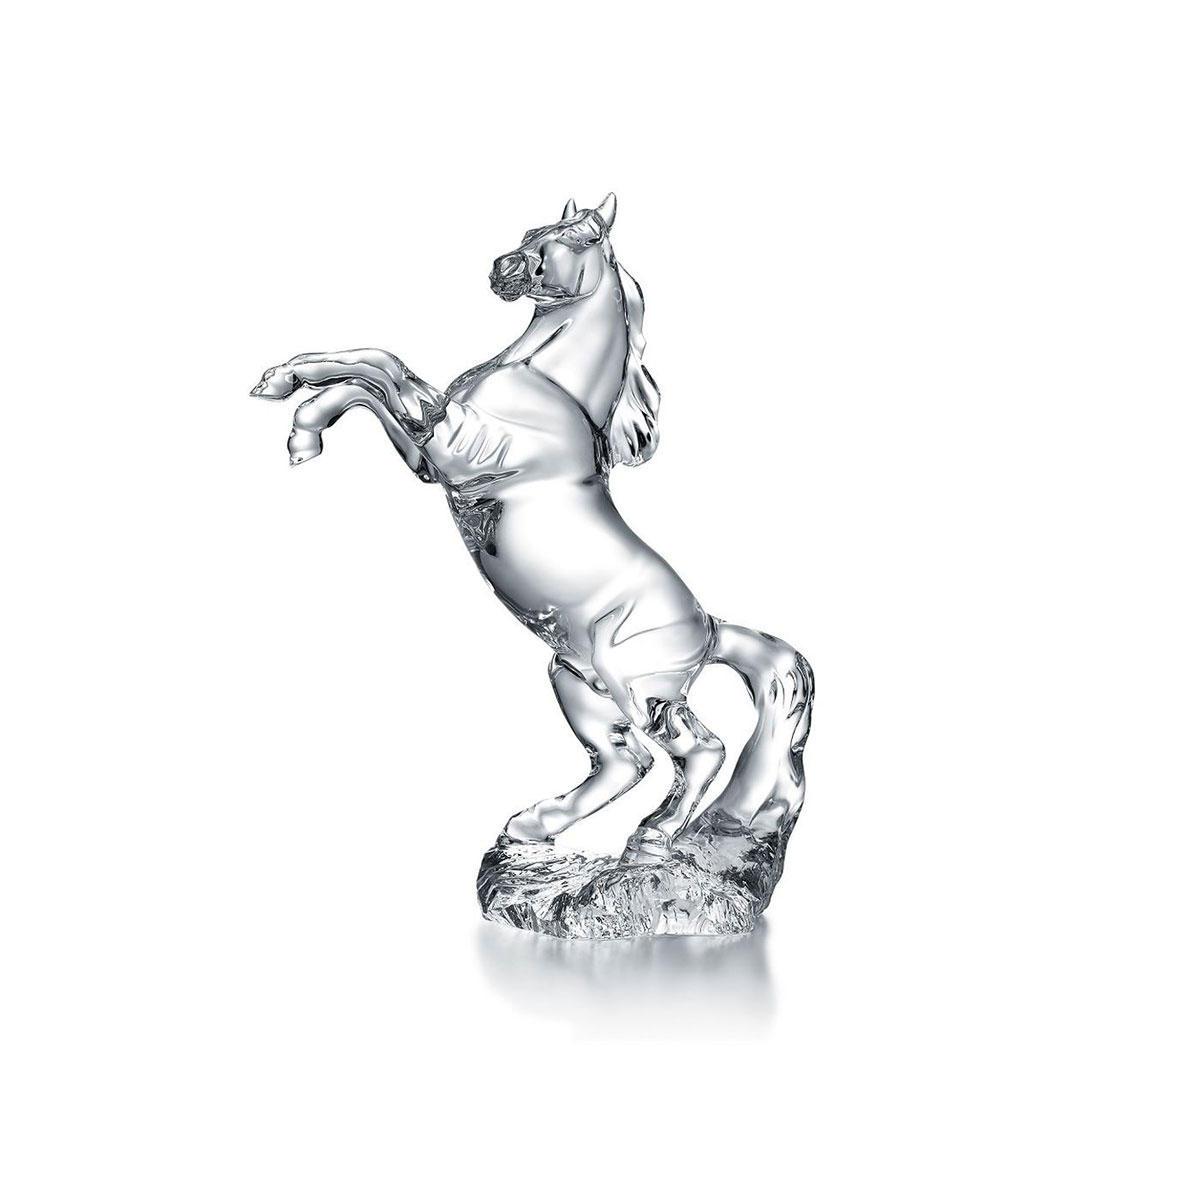 Baccarat Crystal, Pegasus Horse, Clear, Limited Edition of 99